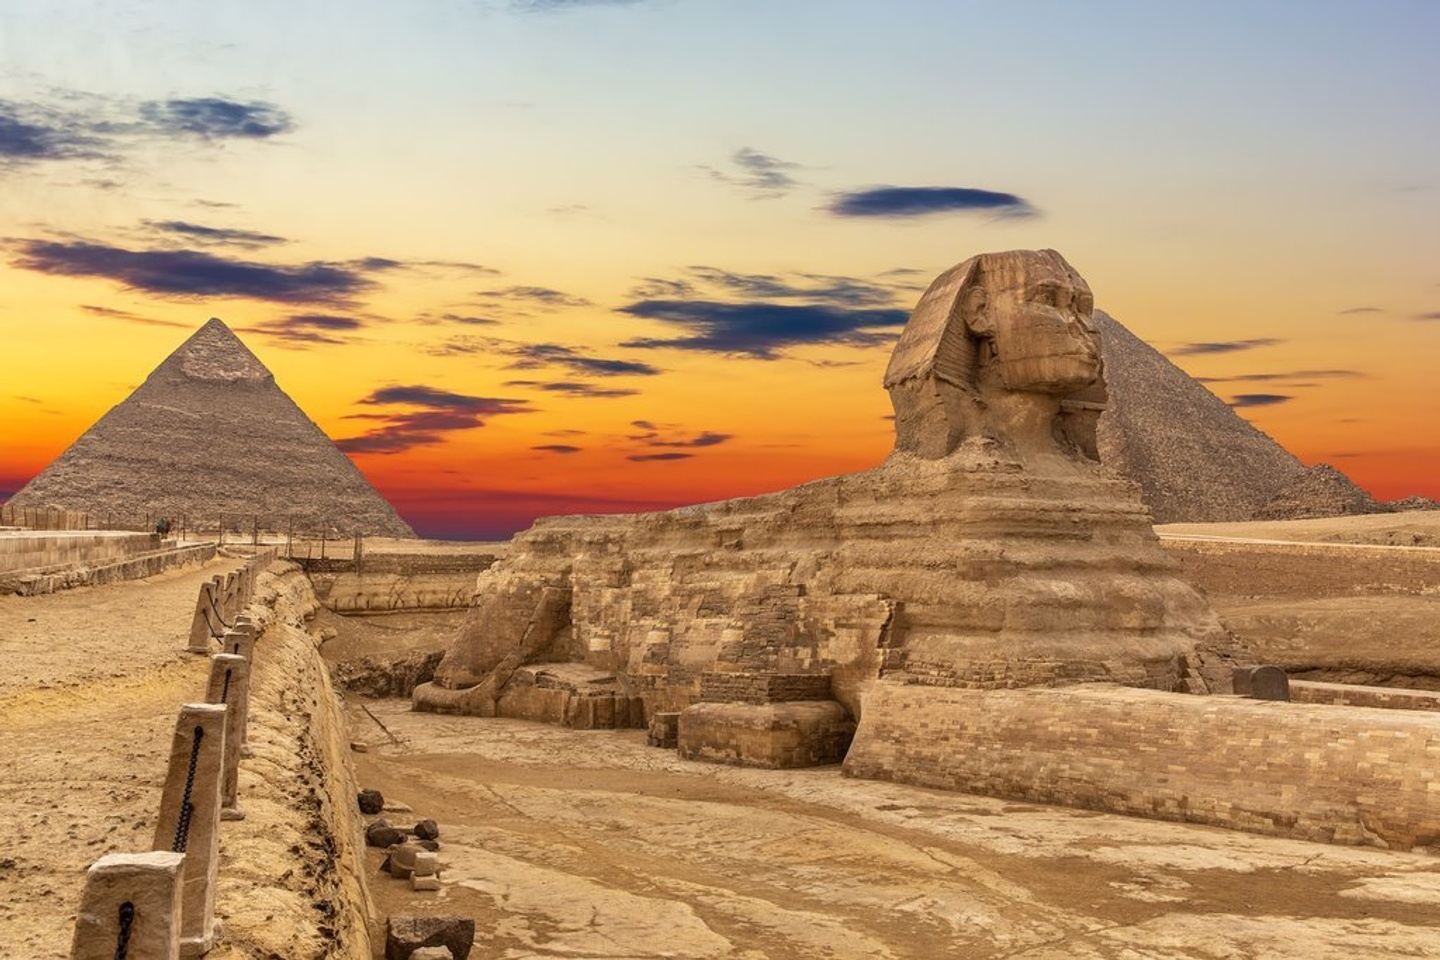 Explore Egypt with GST (With/Without Dubai) Option